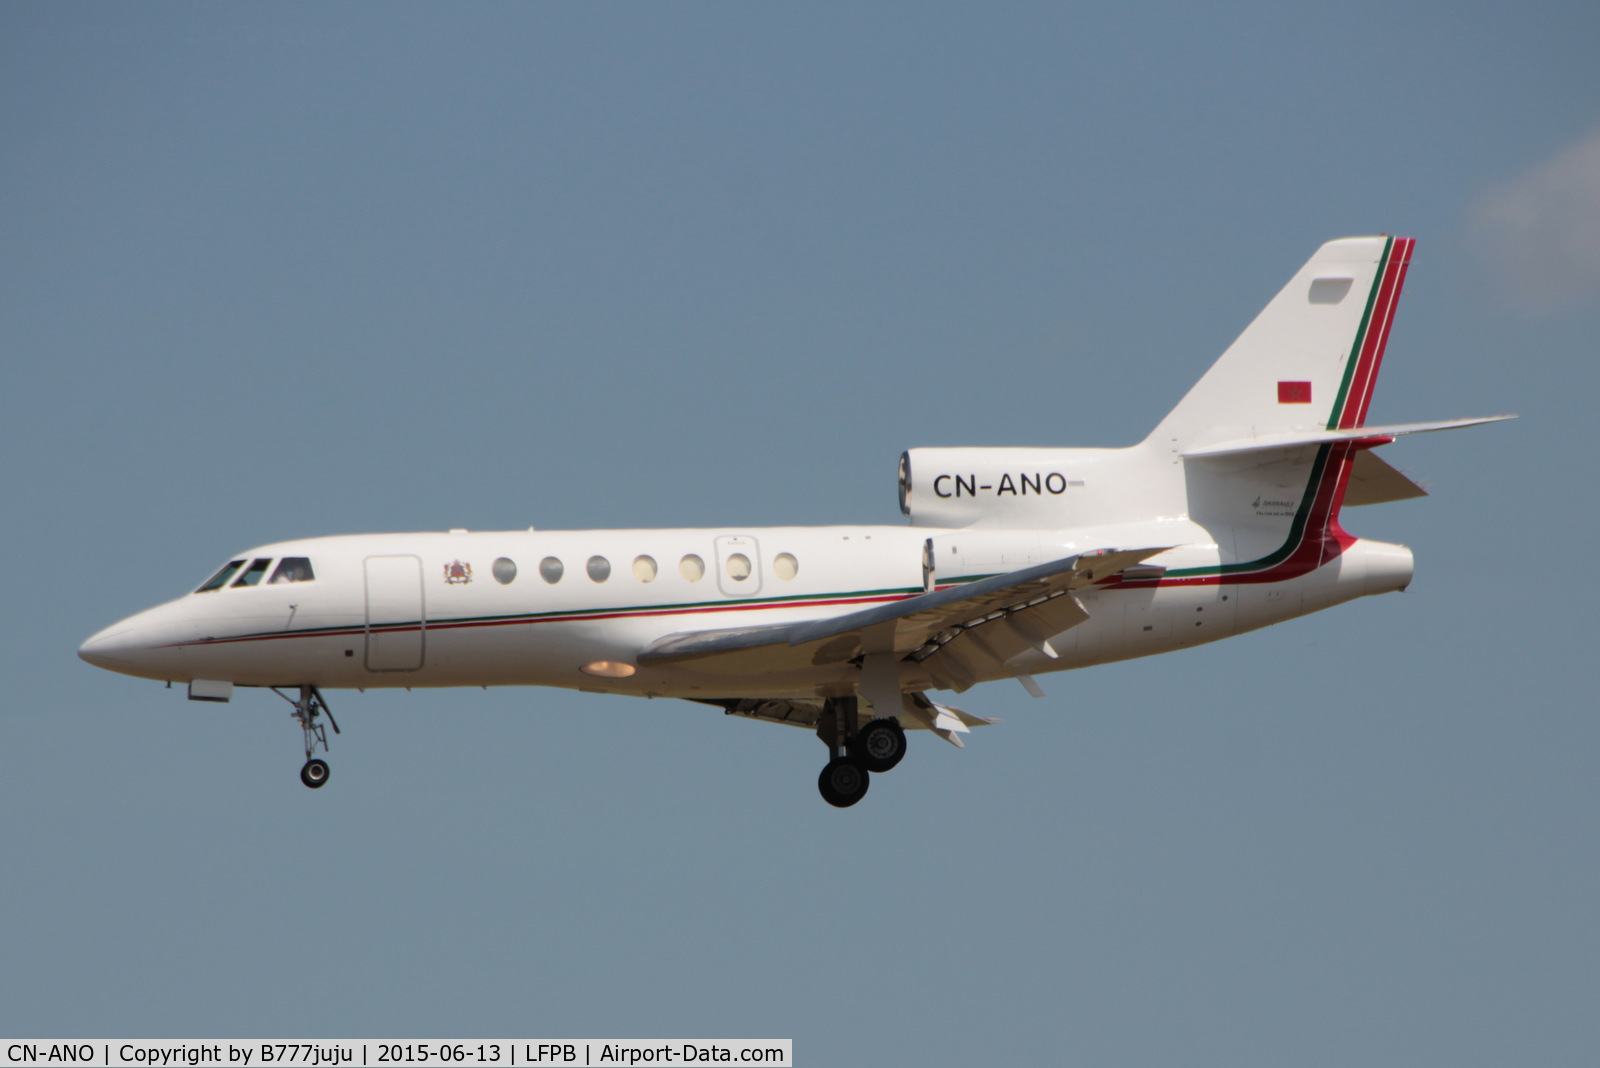 CN-ANO, 1979 Dassault Falcon 50 C/N 12, at Le Bourget